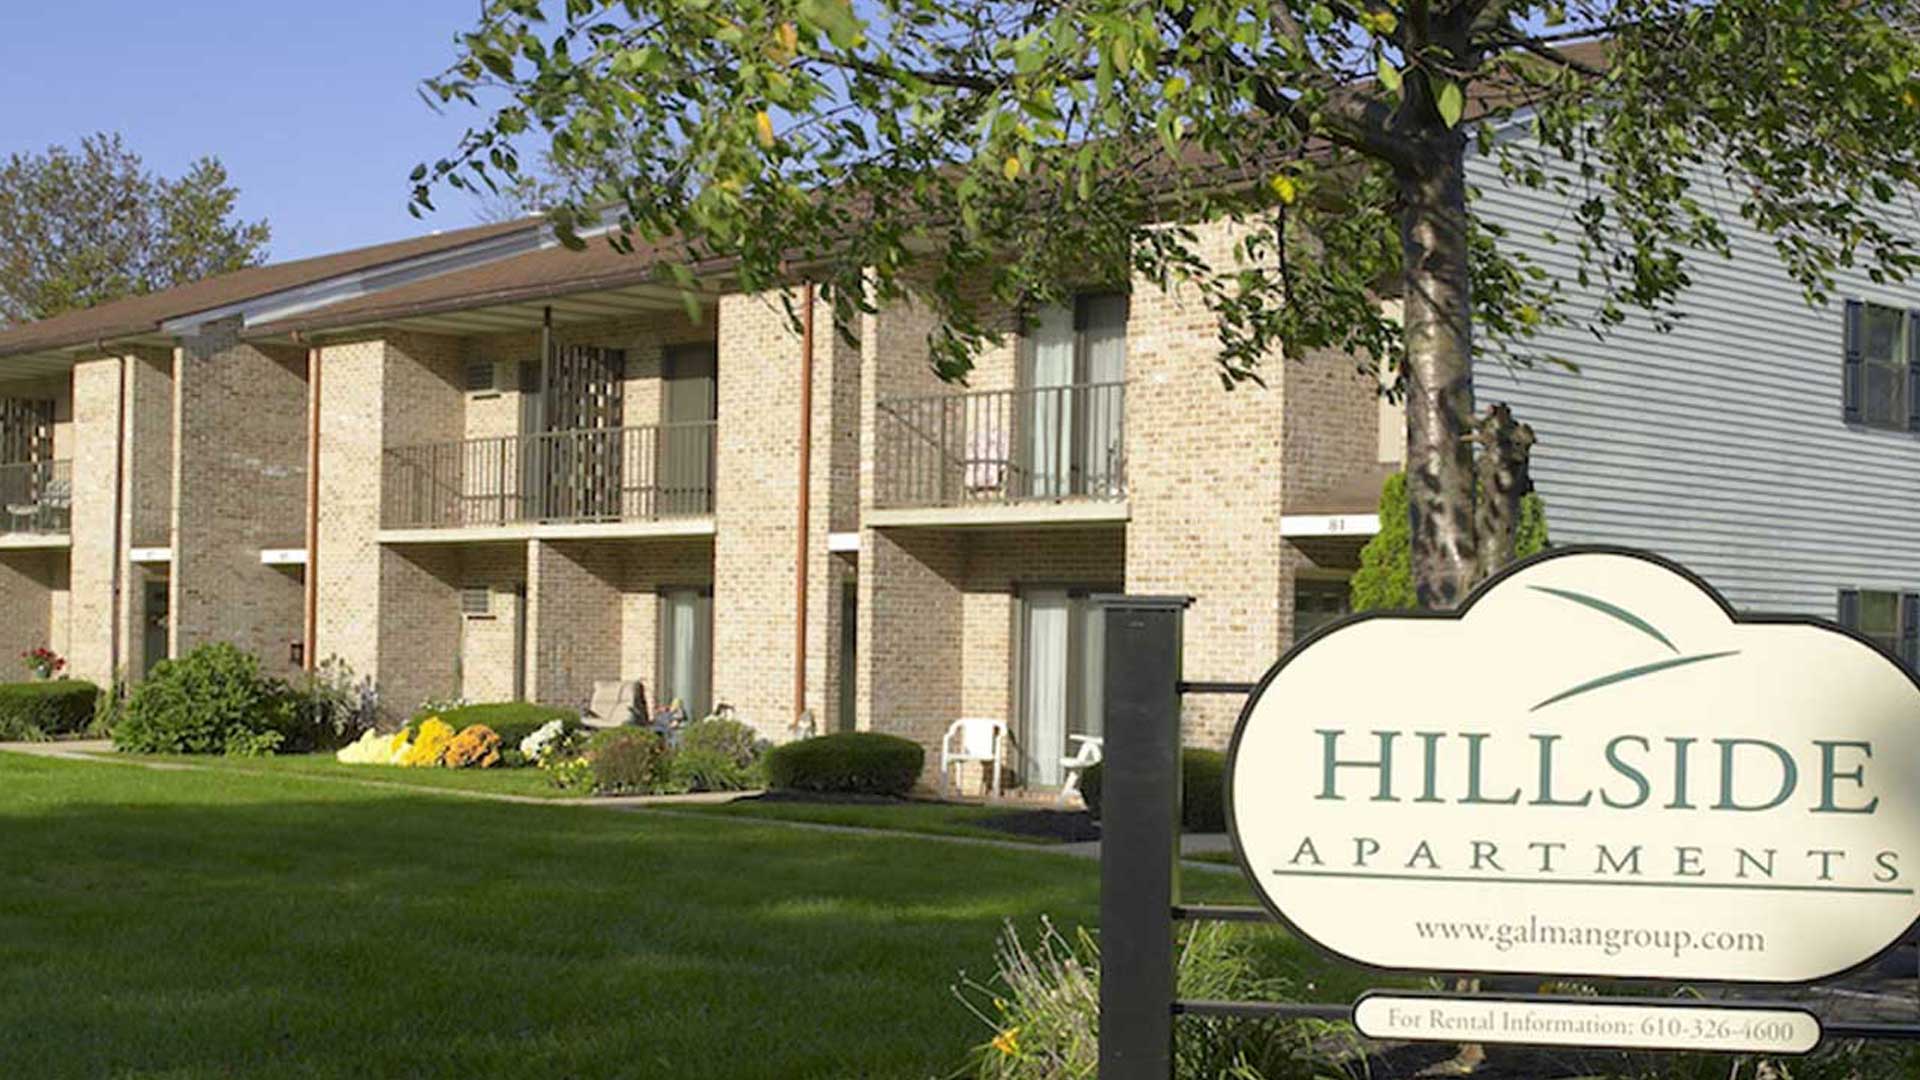 Hillside apartments building exterior with sign